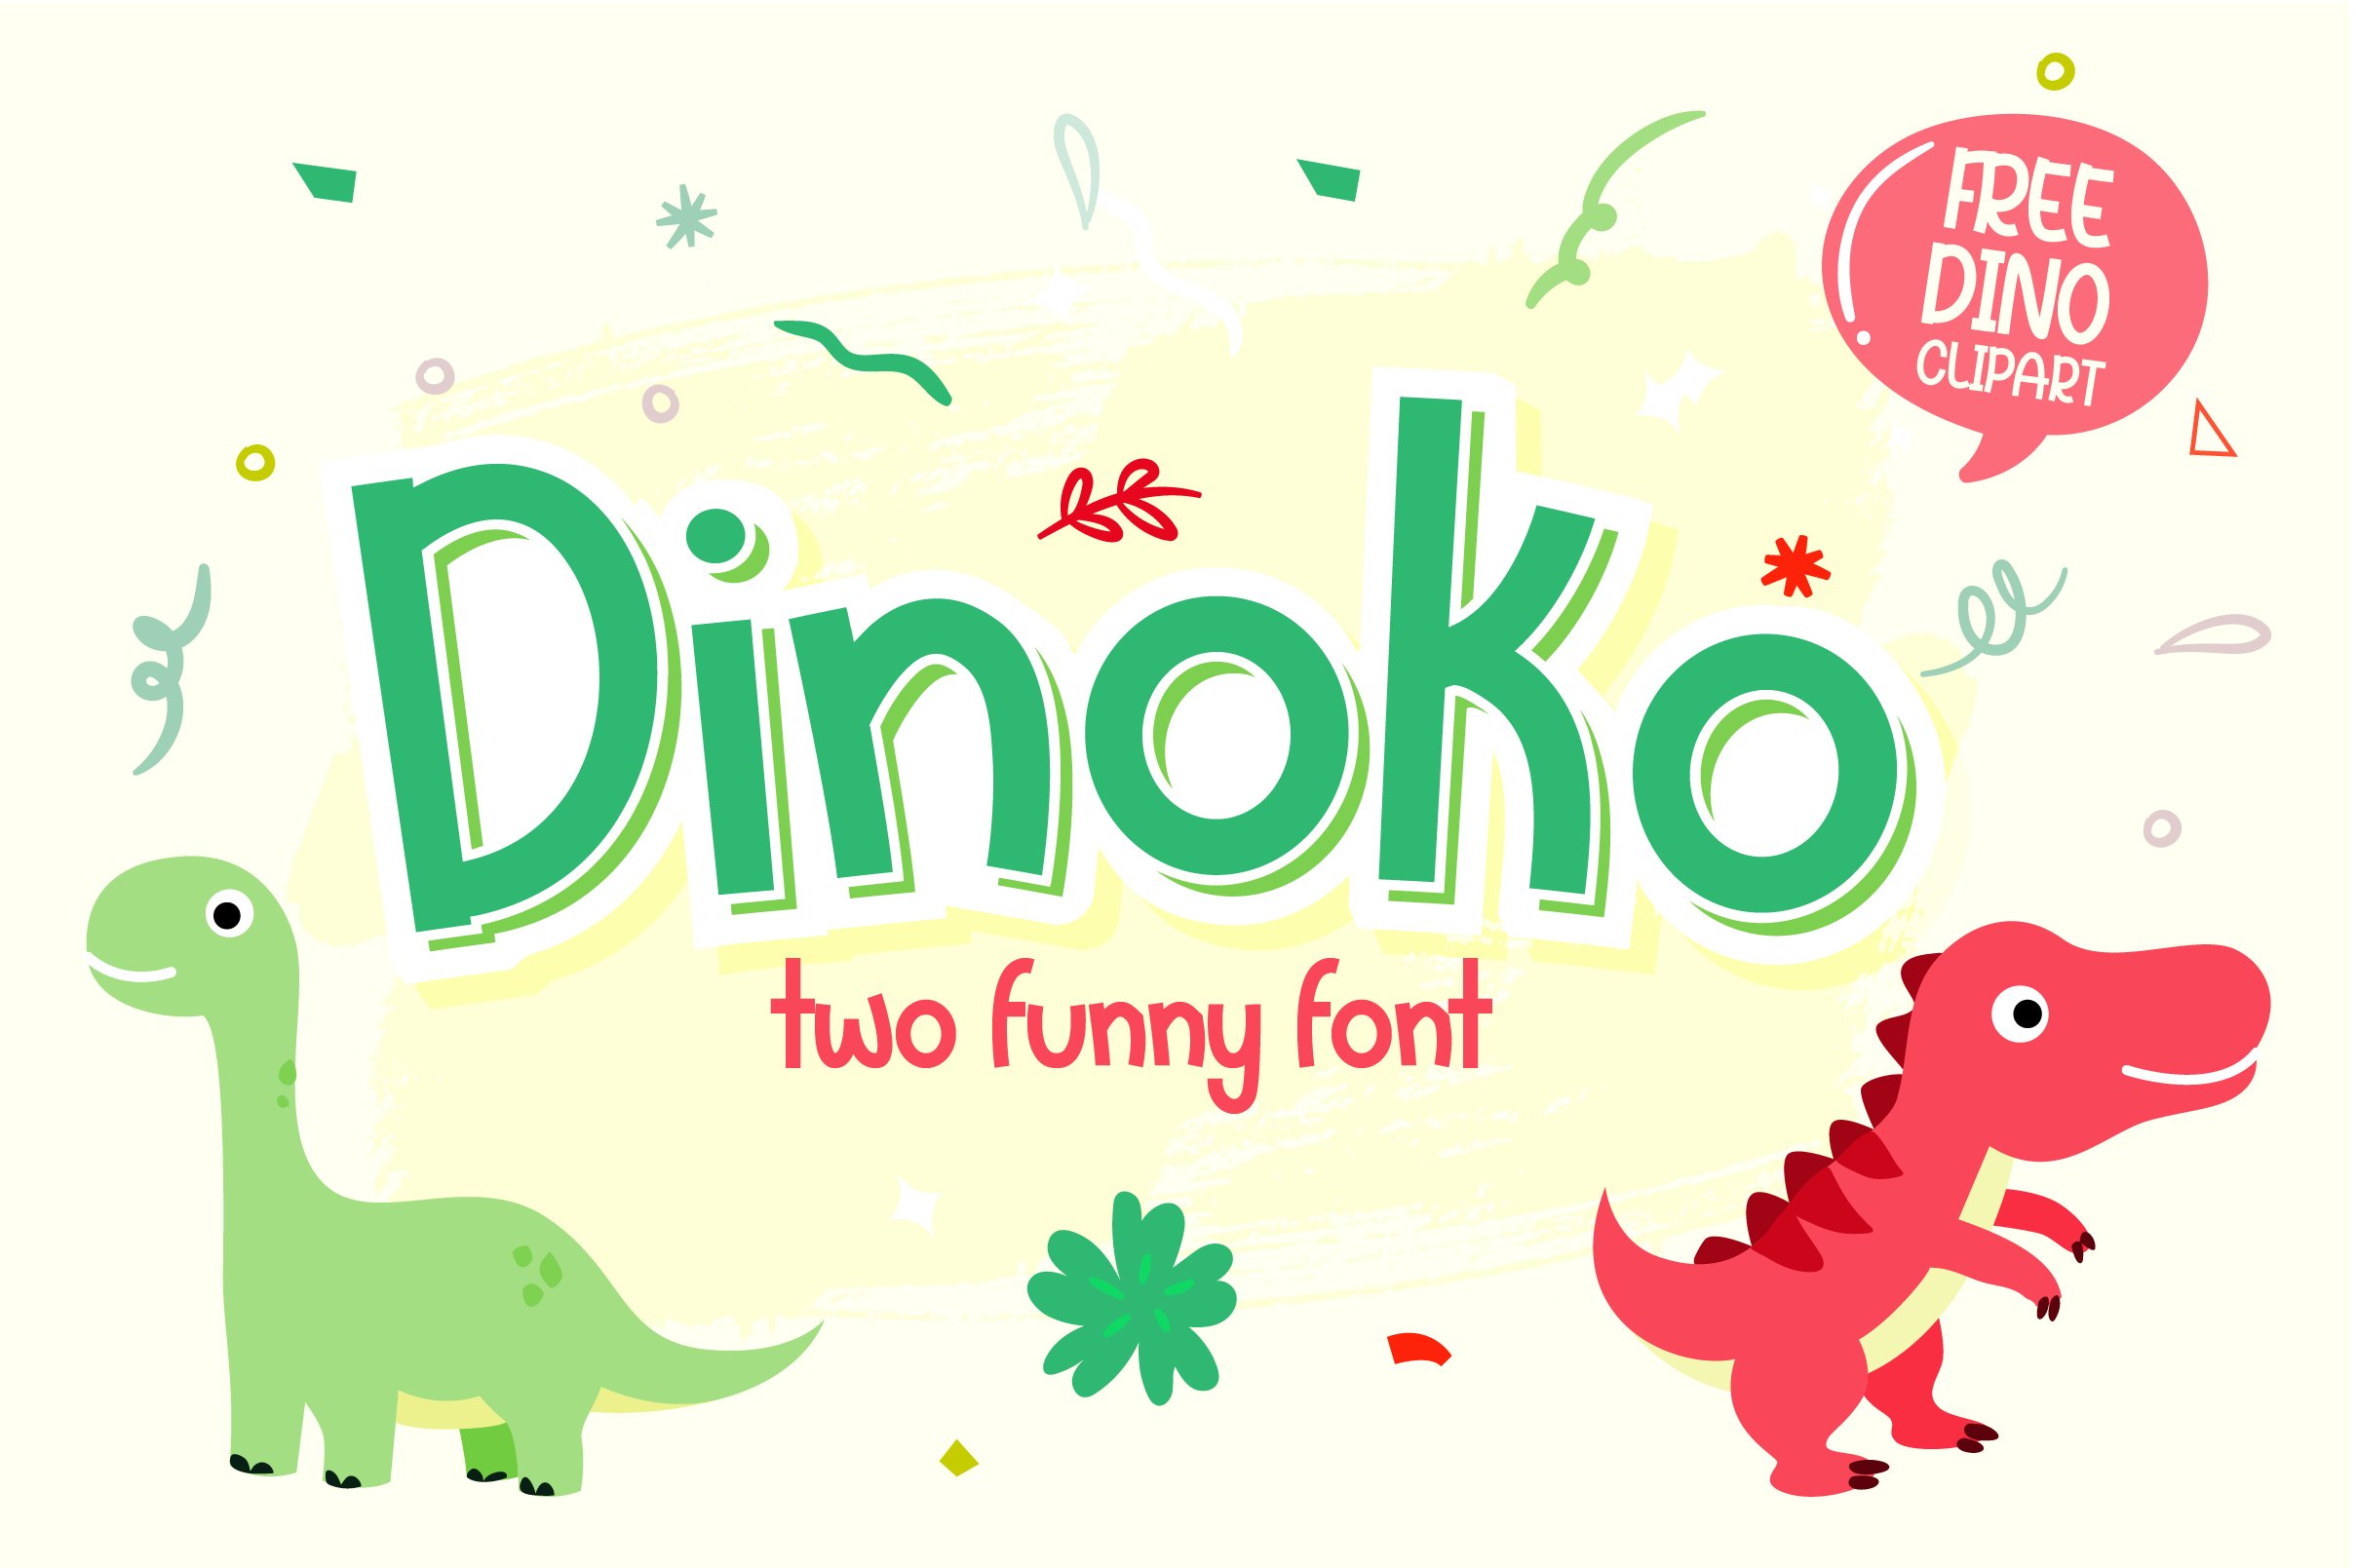 Dinoko - Cute layered font with dinocover image.